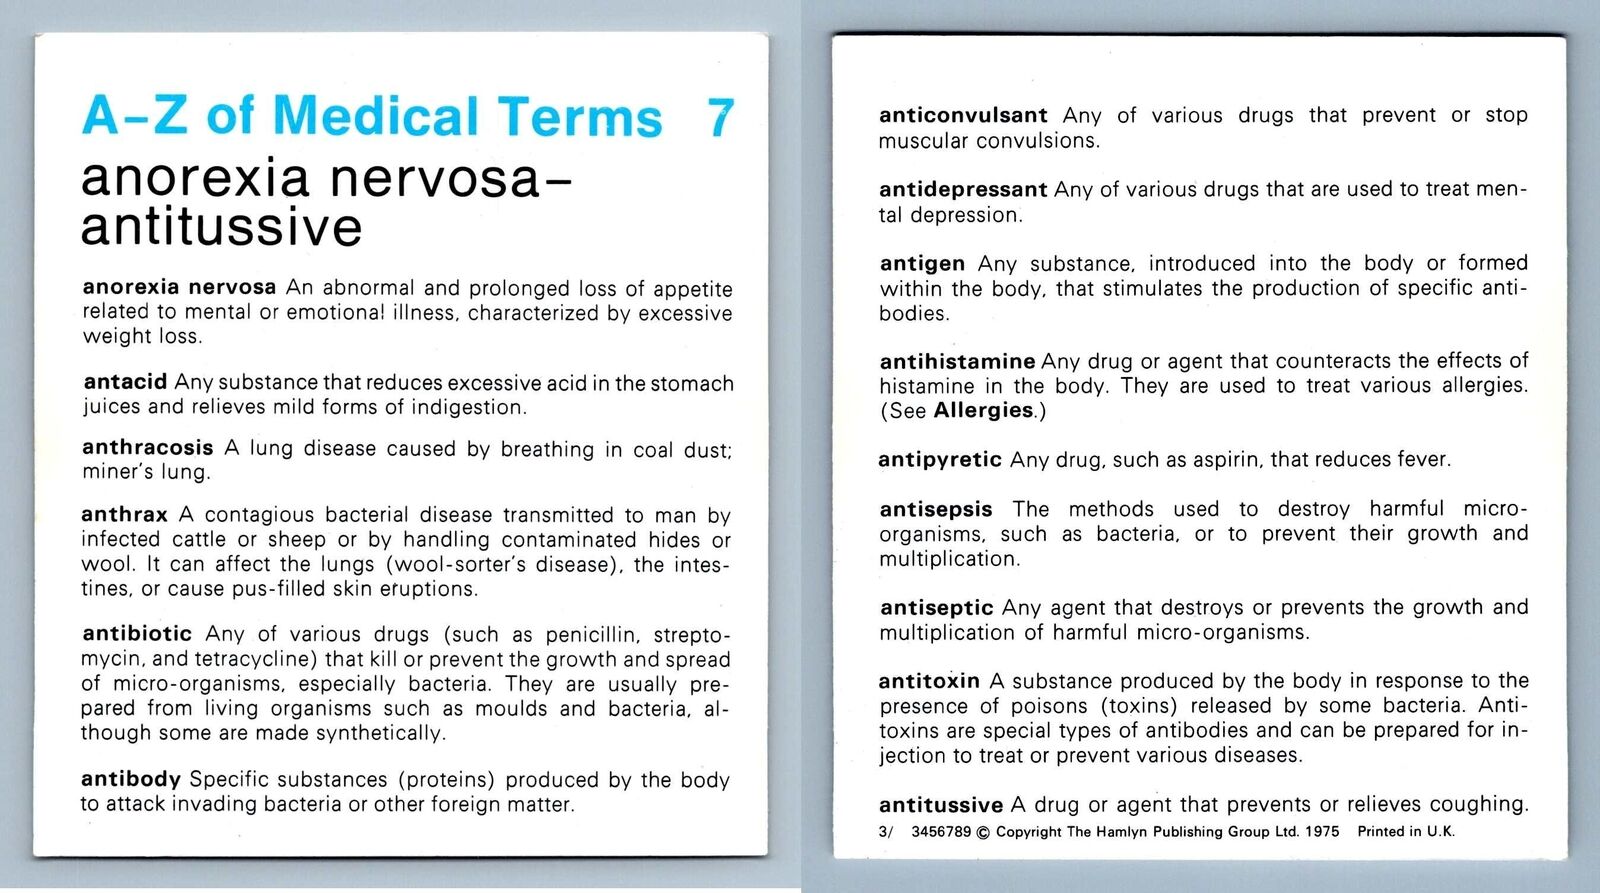 Anorexia Nervosa-Antitussive #7 A-Z Terms - Home Medical Guide 1975 Hamlyn Card